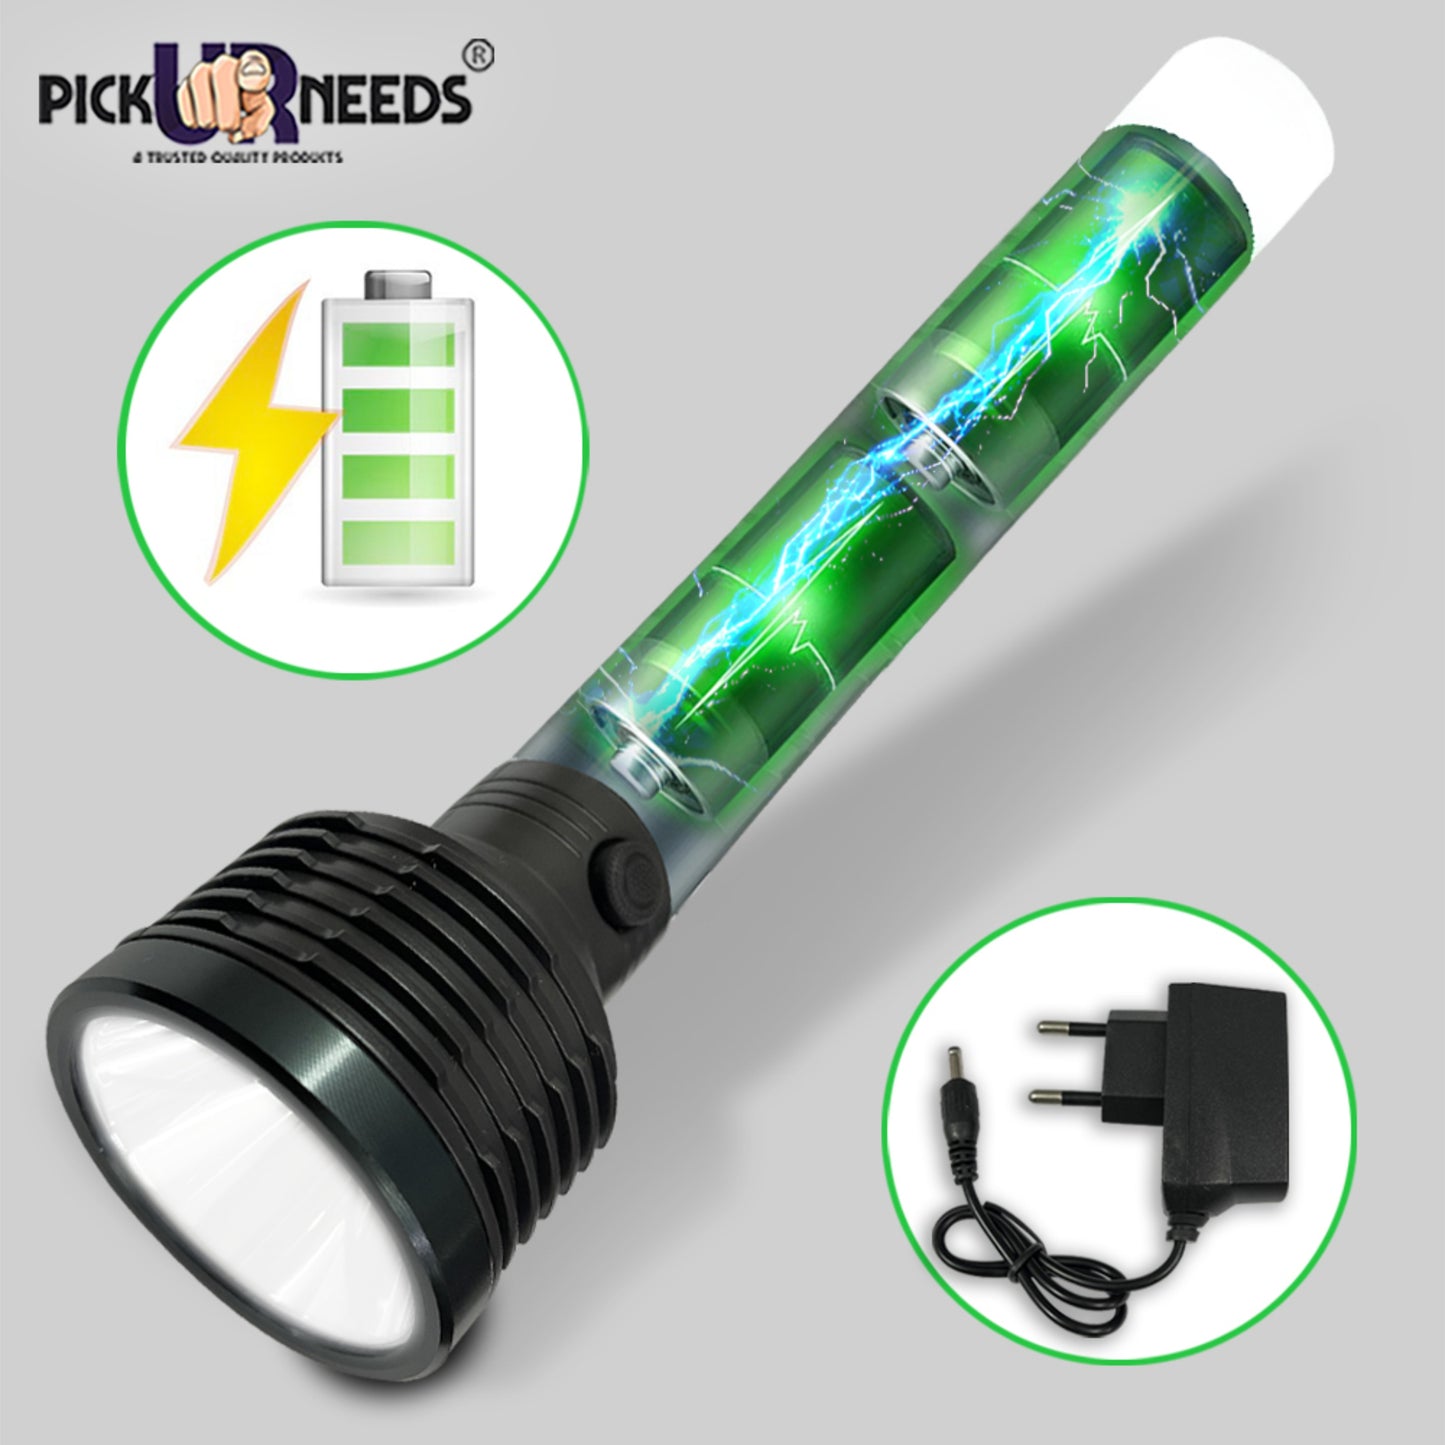 Pick Ur Needs Rechargeable Aluminium LED Long Range Home Emergency Search Torch Light